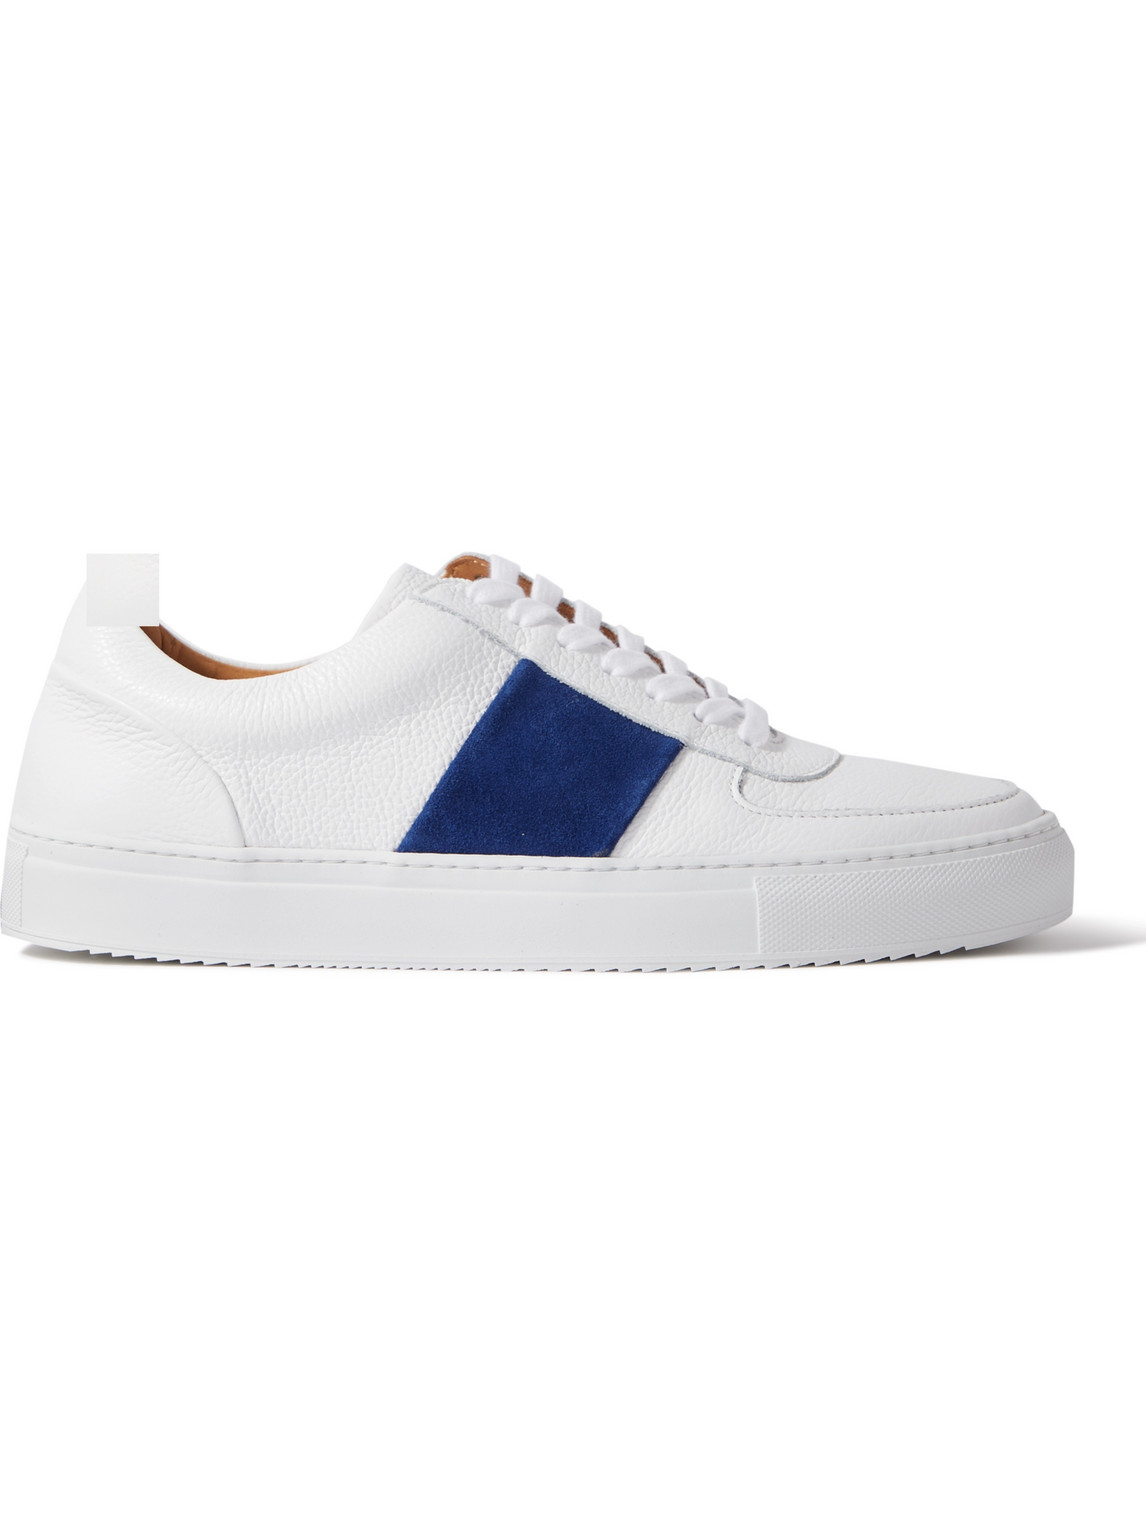 Larry Pebble-Grain Leather and Suede Sneakers